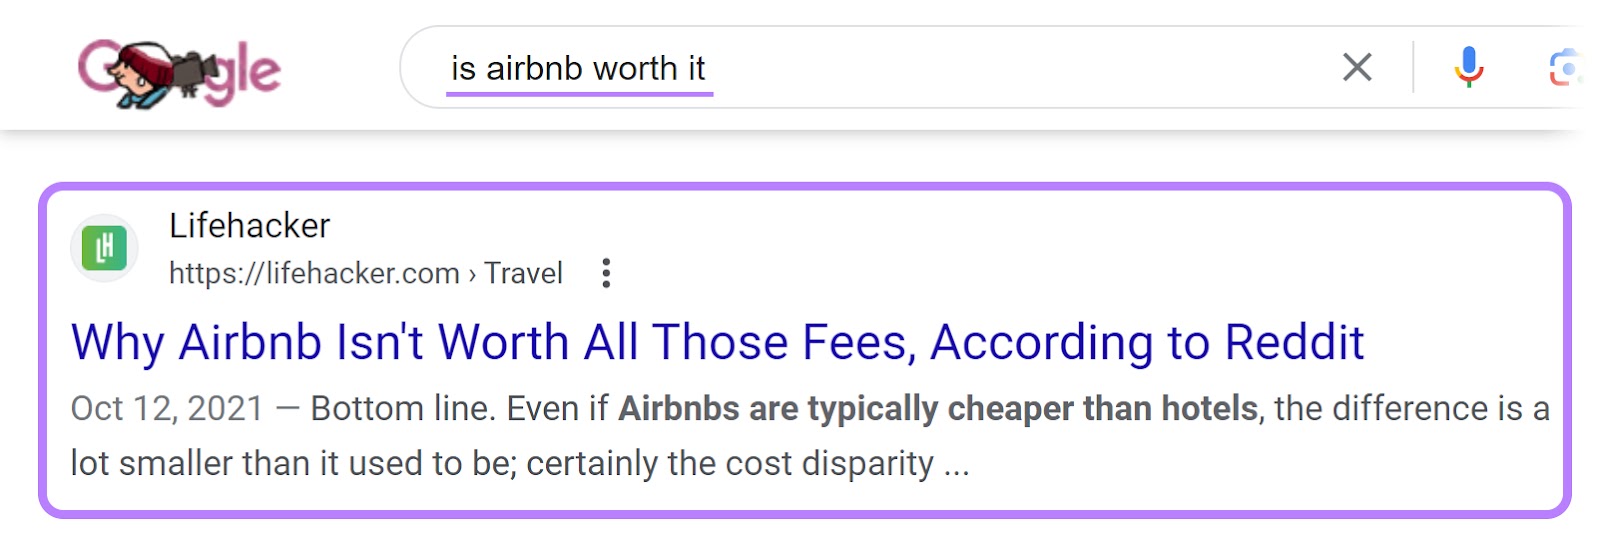 Airbnb's article on Google SERP for “is airbnb worth it" query